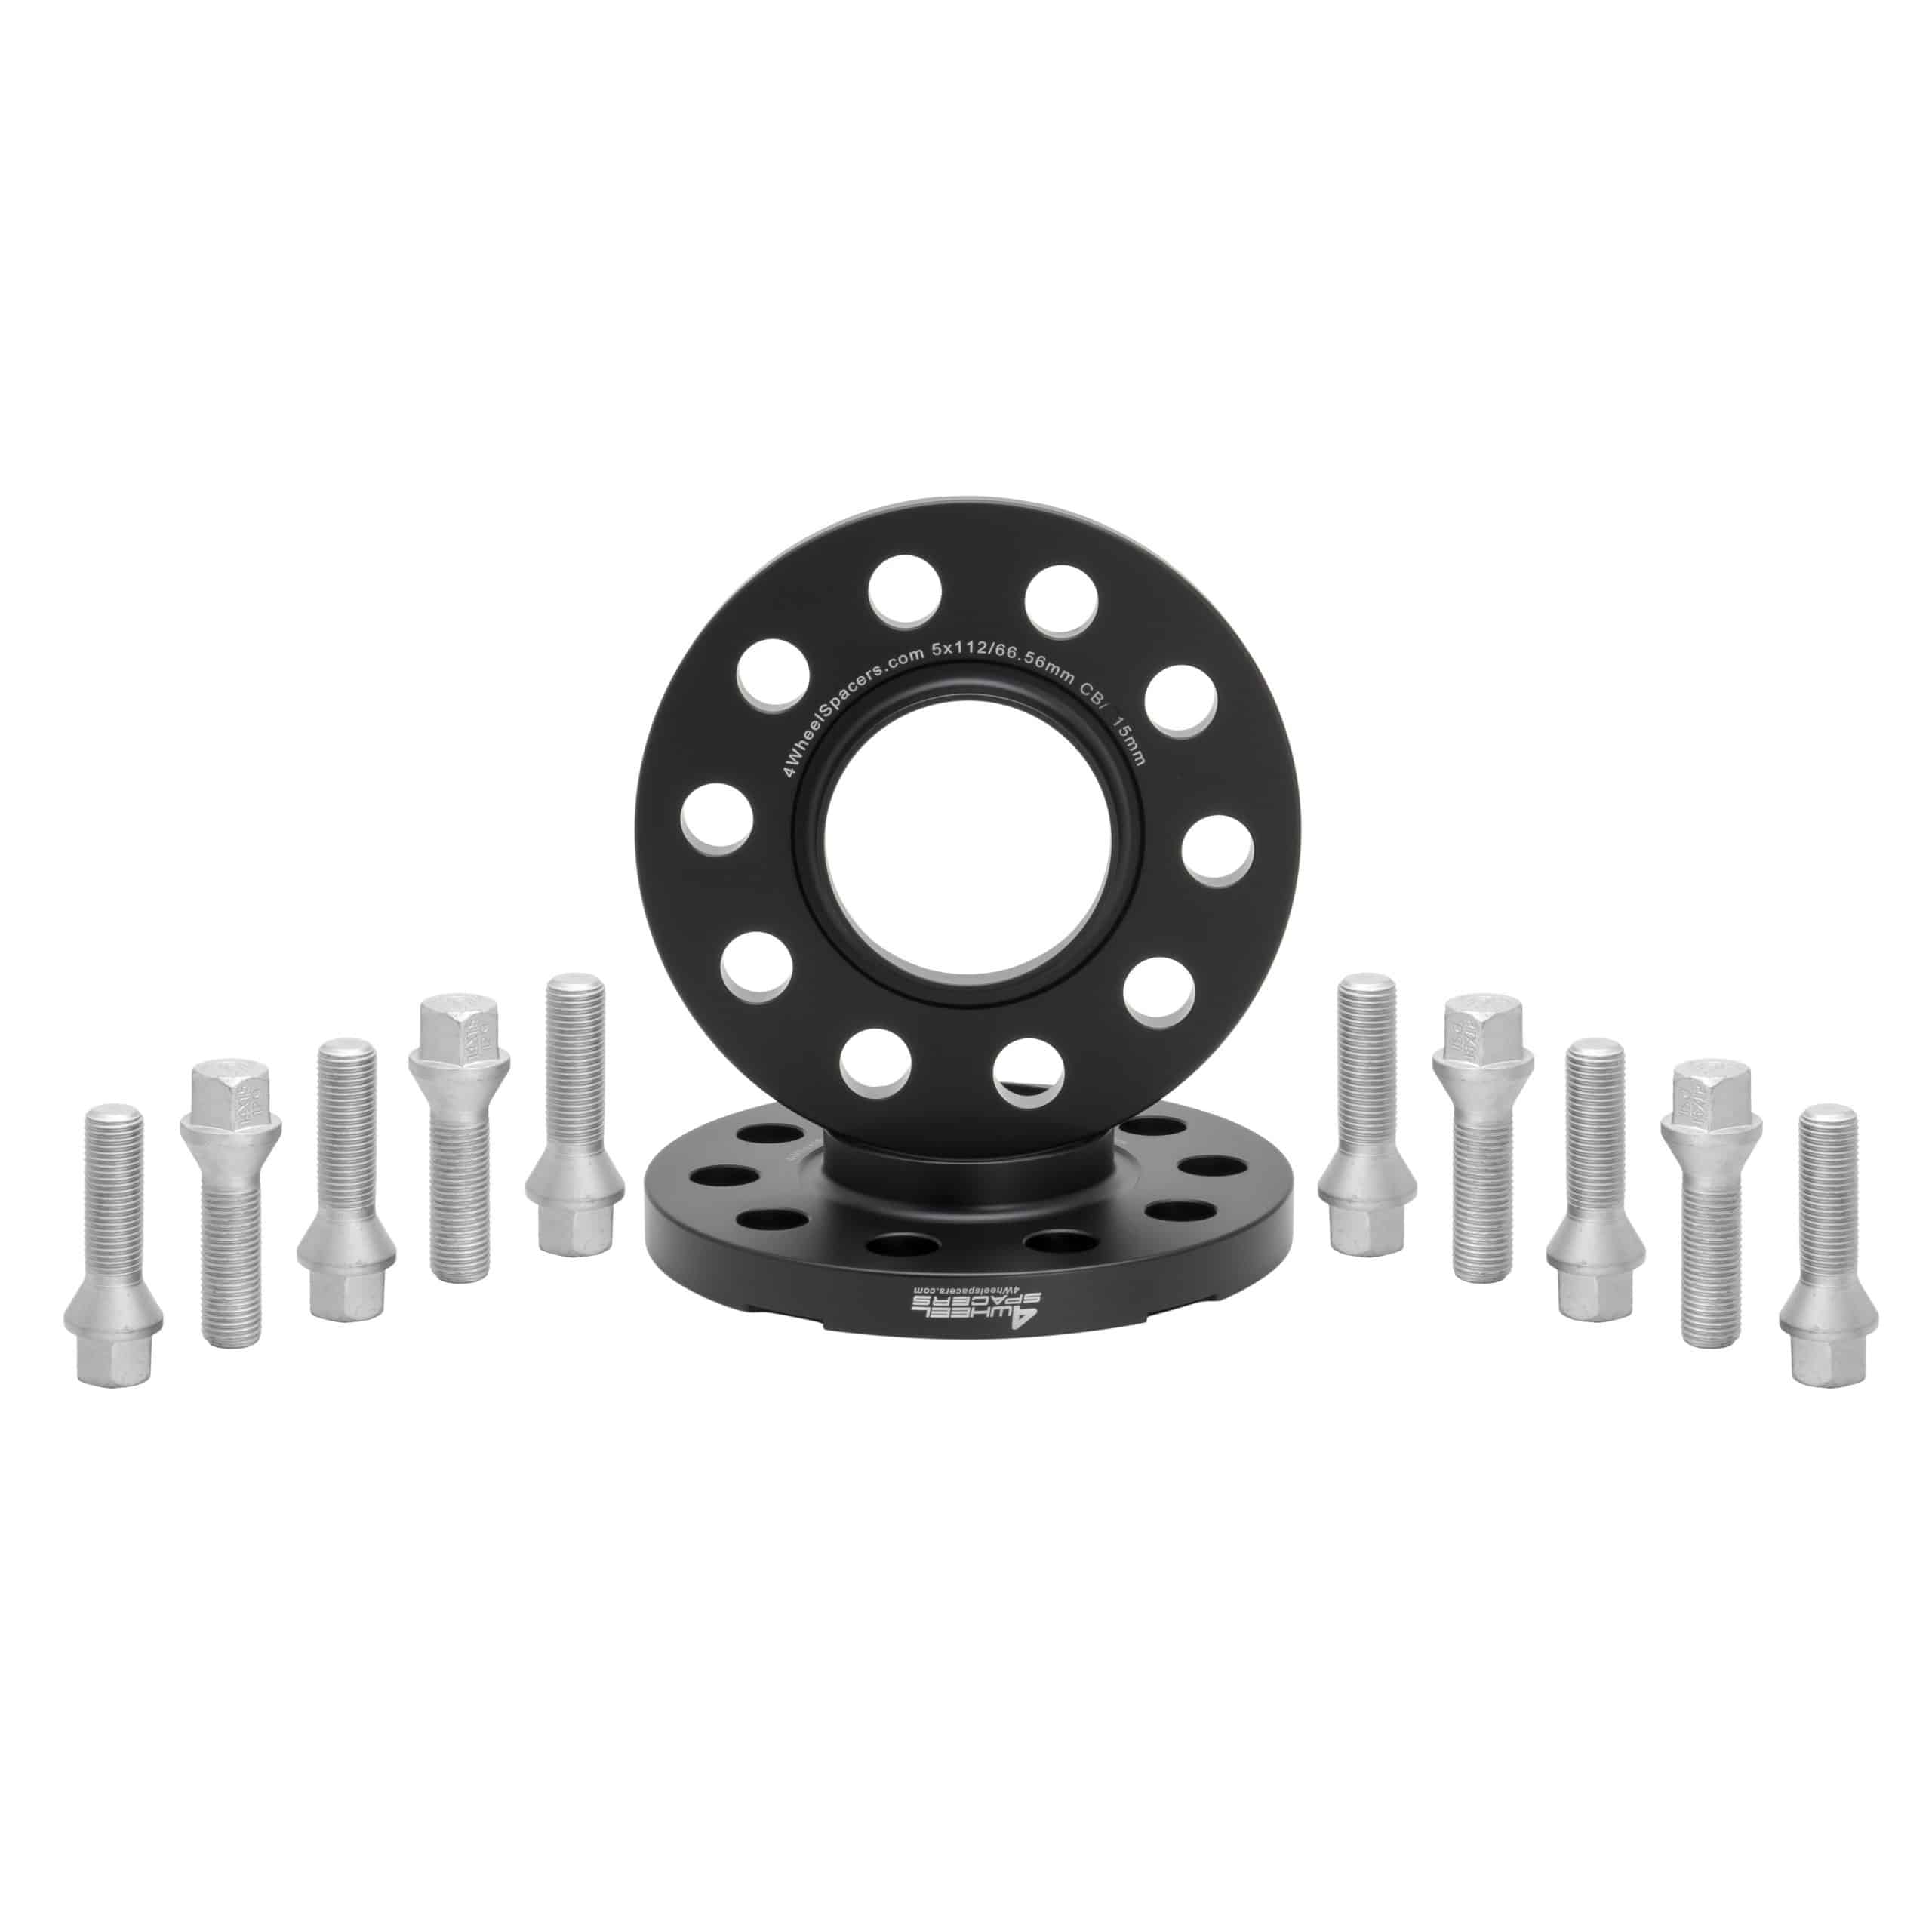 Wheel Spacers 15mm 5x112 57.1 2 OE Bolts For VW Transporter T4 90-04 